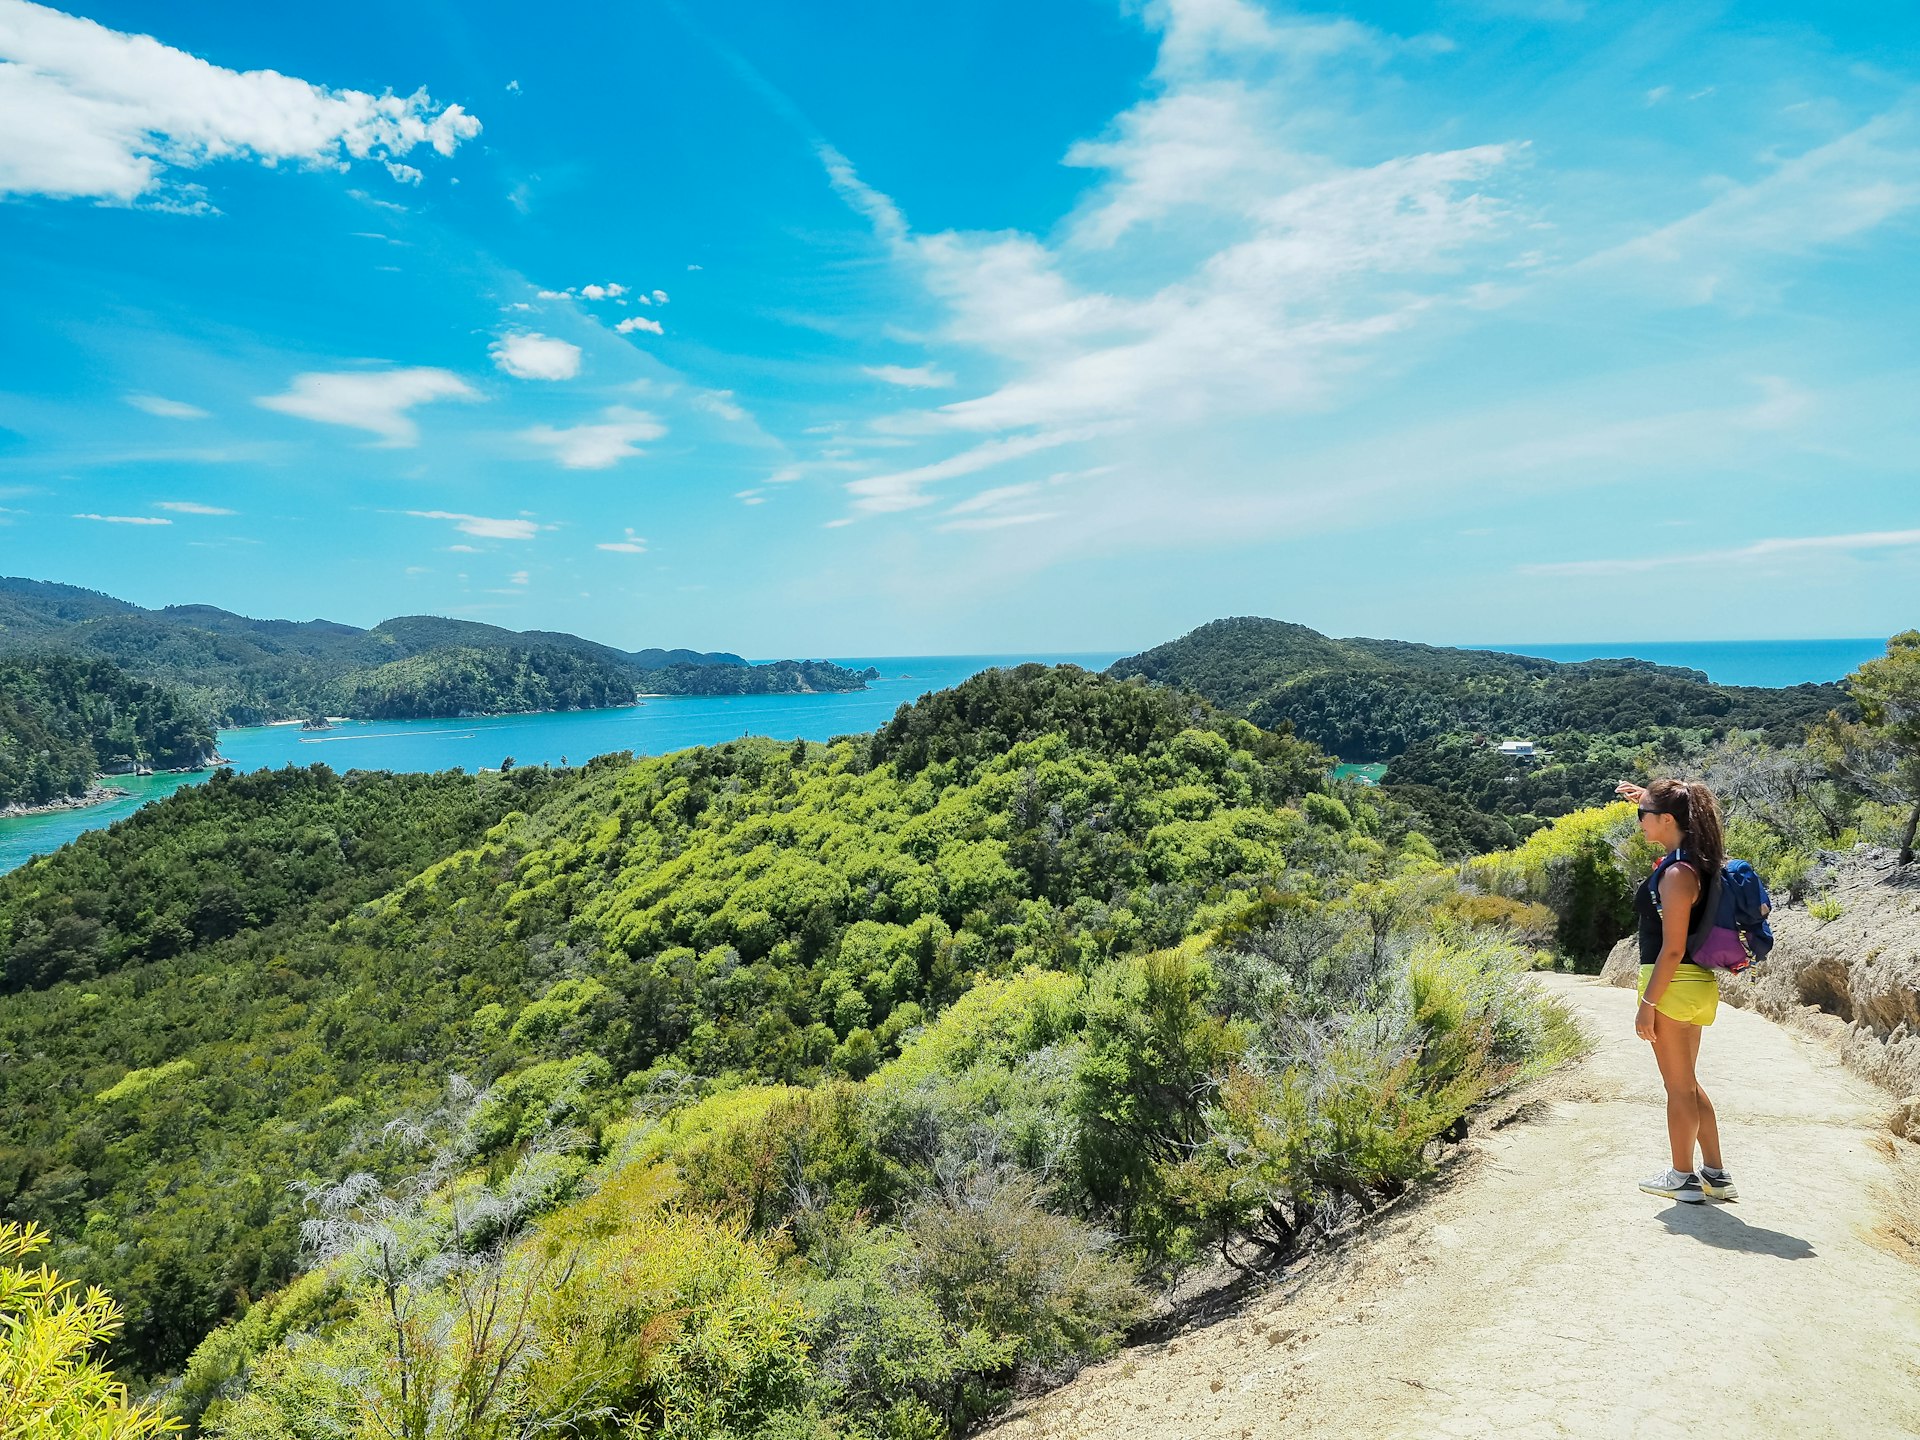 A woman stops to take in the view of the Anchorage section on the Abel Tasman Coast Track with its verdant green bushes and sparkling blue waters